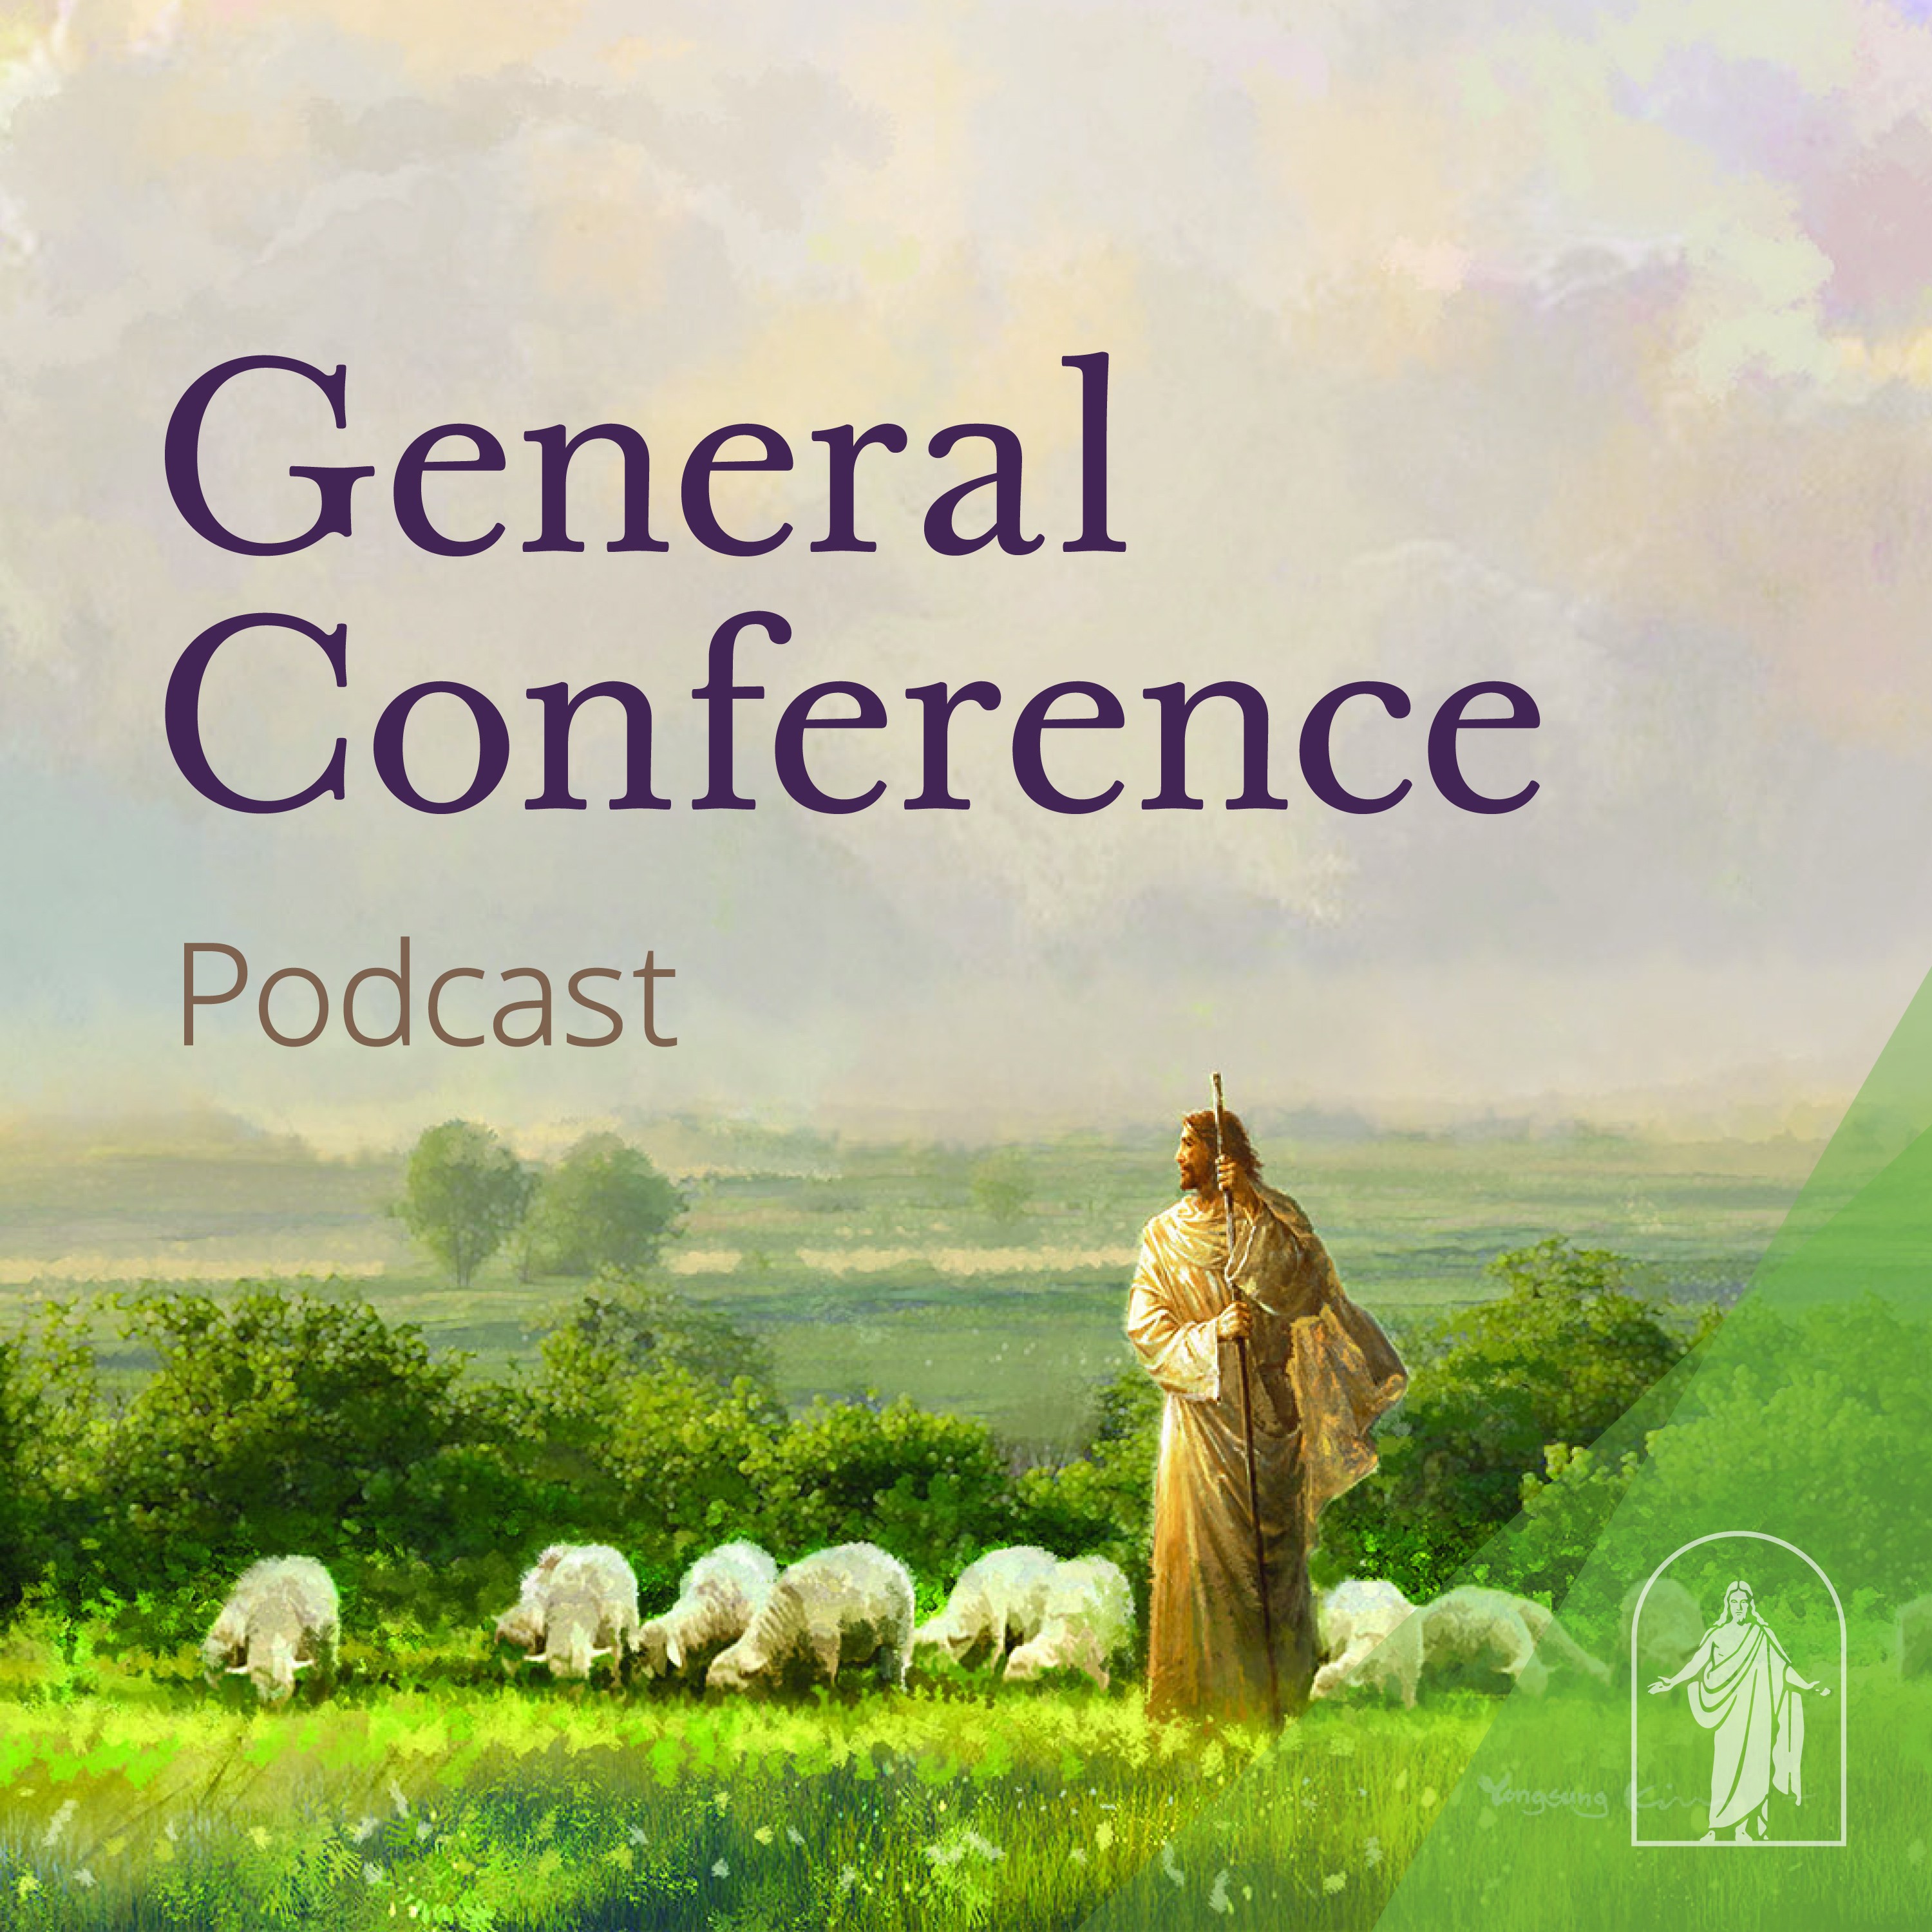 Cover art for the October 2021 General Conference Podcast. Background imagery, "I Shall Not Want" by Yongsung Kim.